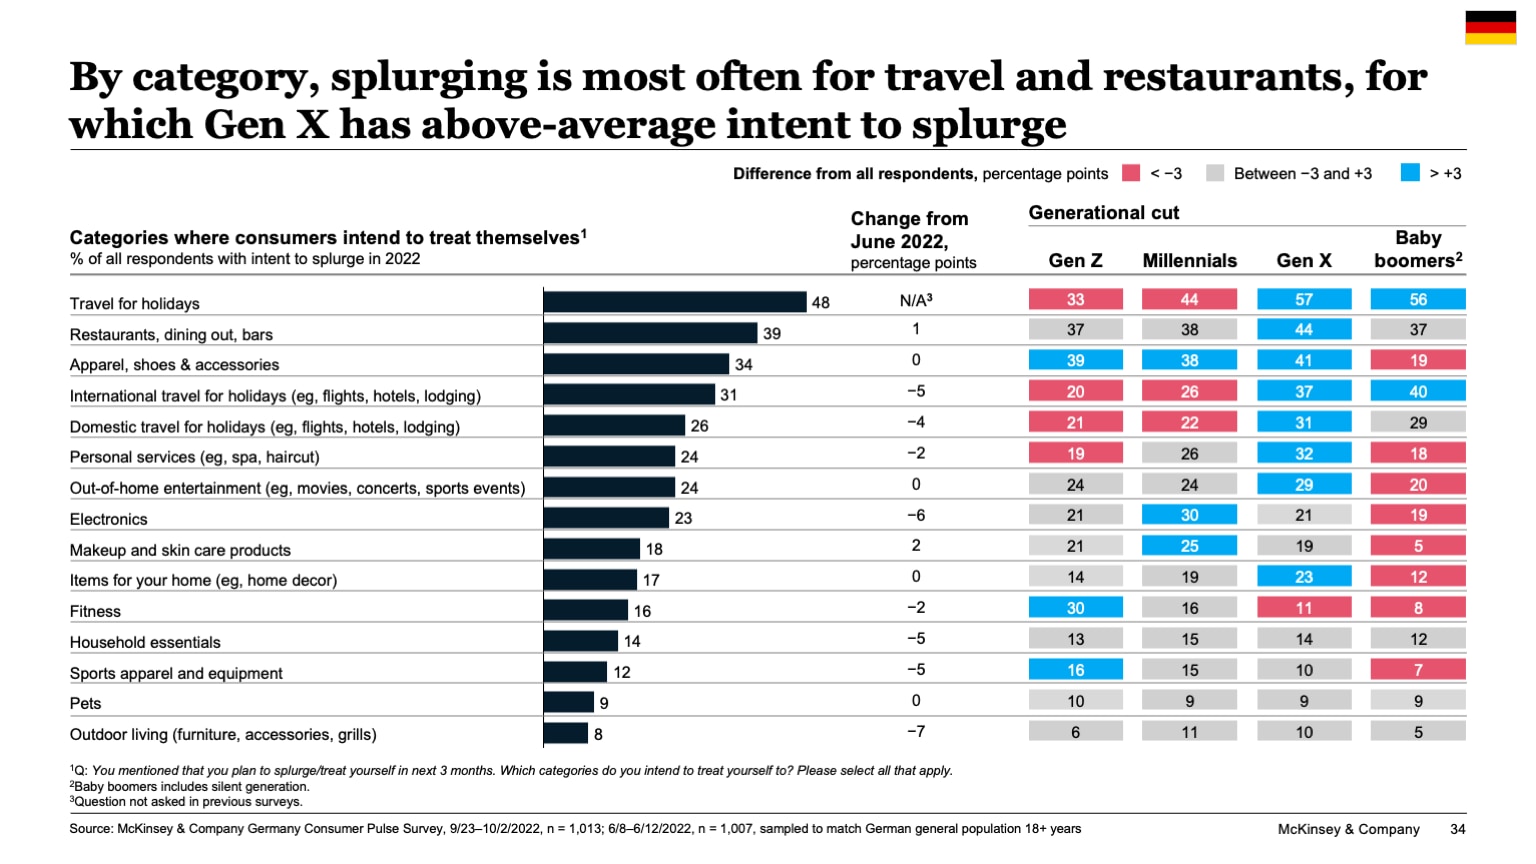 By category, splurging is most often for travel and restaurants, for which Gen X has above-average intent to splurge